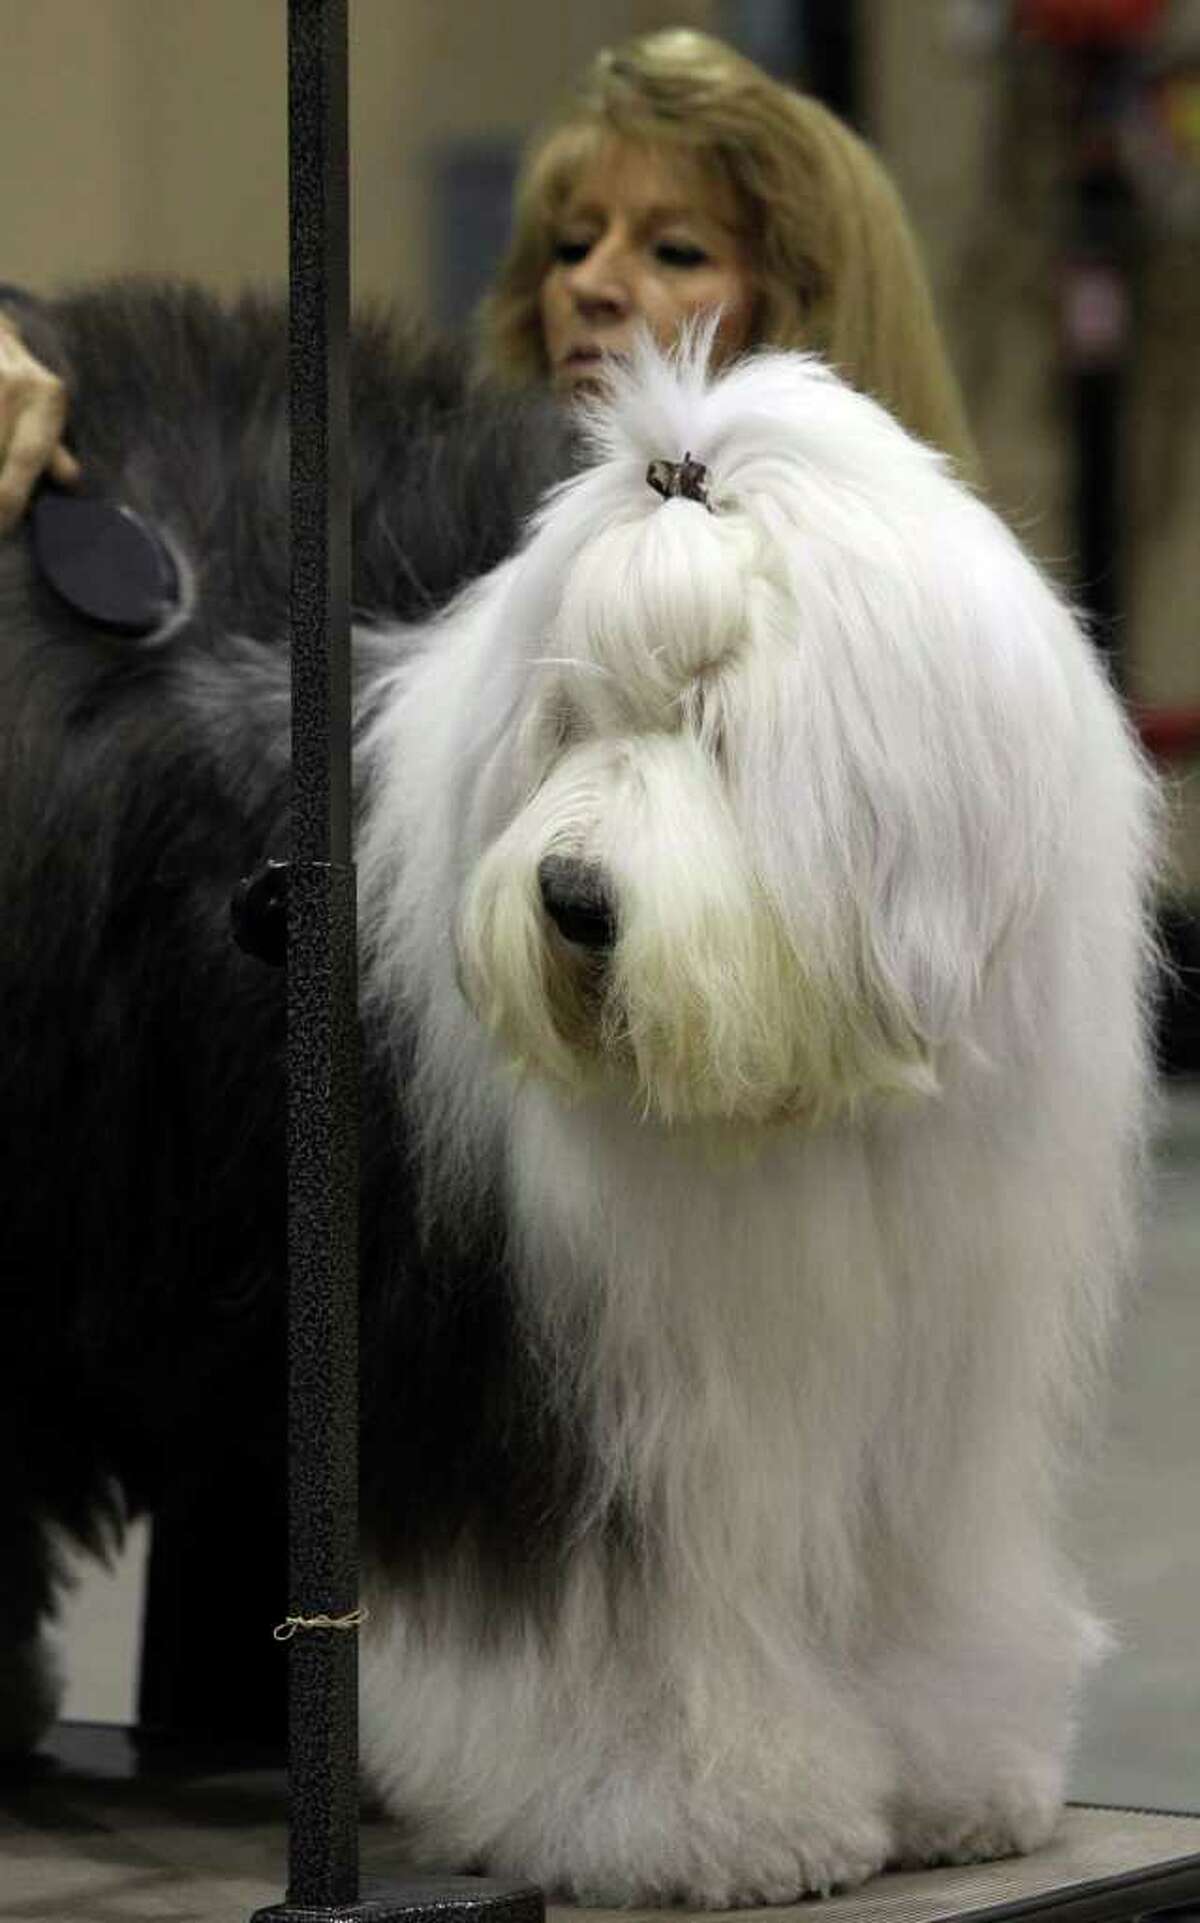 Sharon Tapscott of Houston grooms Sweet the old English Sheep Dog on Sunday, July 17, 2011, during the last day of the River City Cluster of Dog Shows. The dog is owned by Tapscott's daughter, Amy Pope.